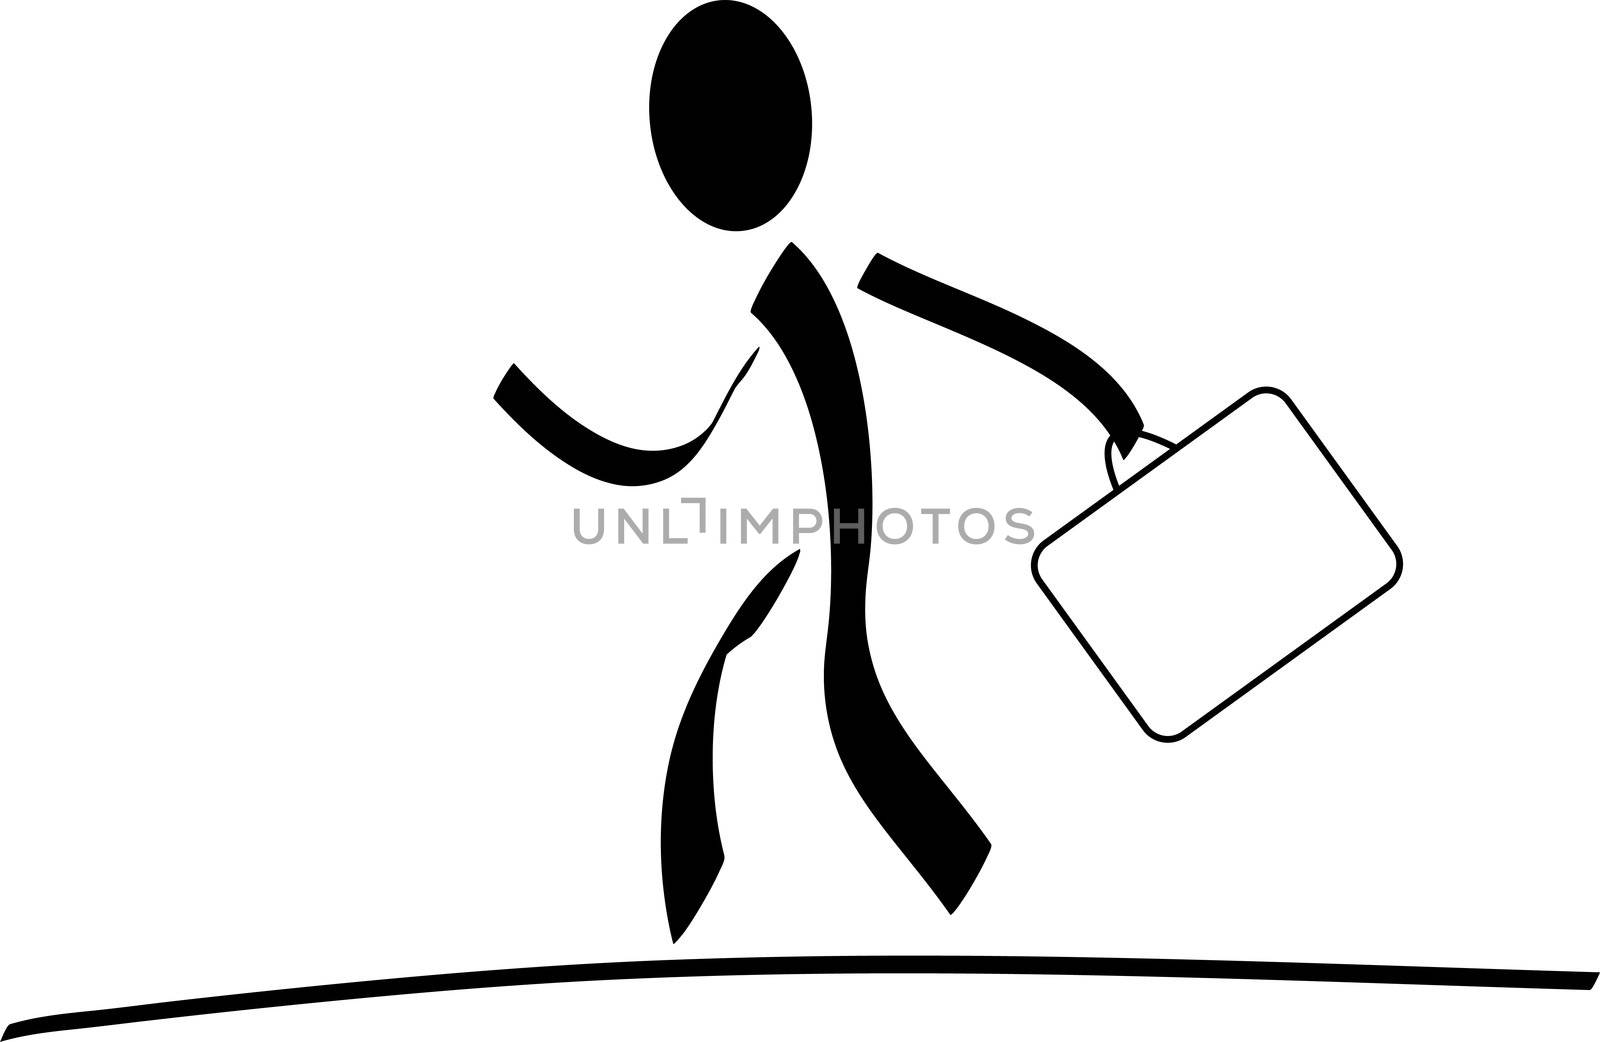 A stylized person running stressed. All isolated on white background.